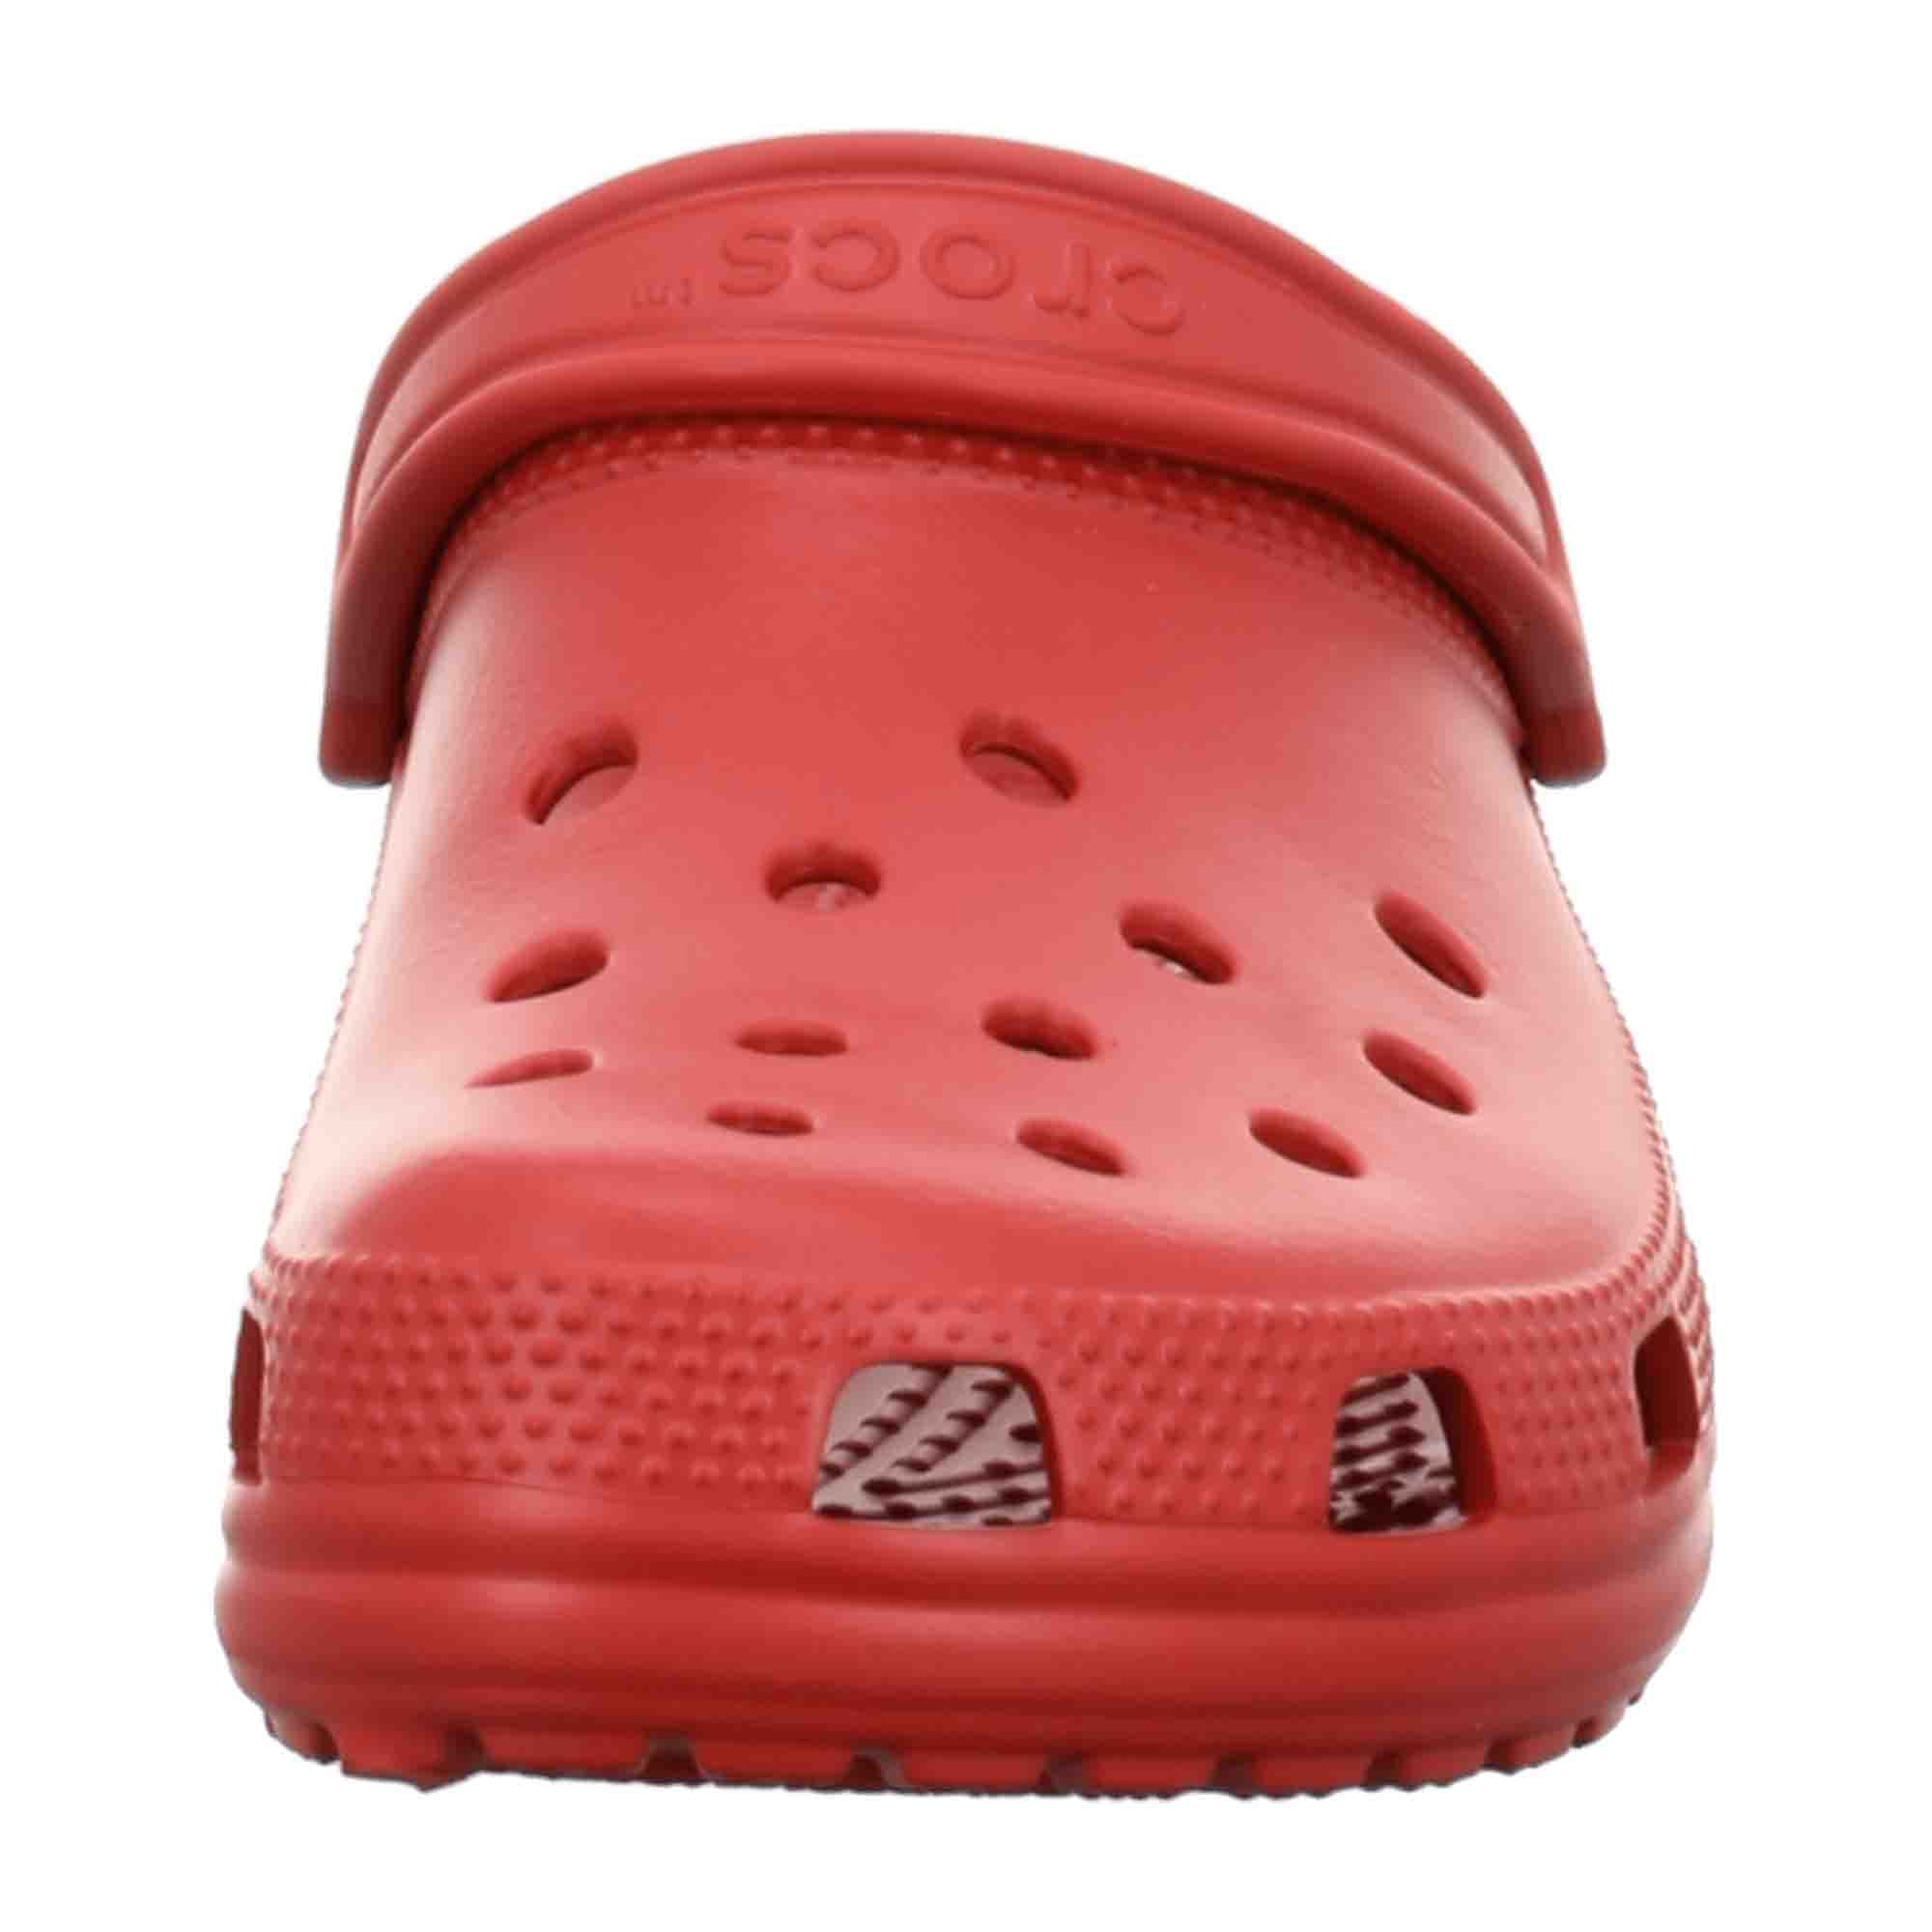 Crocs Classic Clogs for Men, Red - Comfortable, Lightweight, and Fashion-forward Footwear